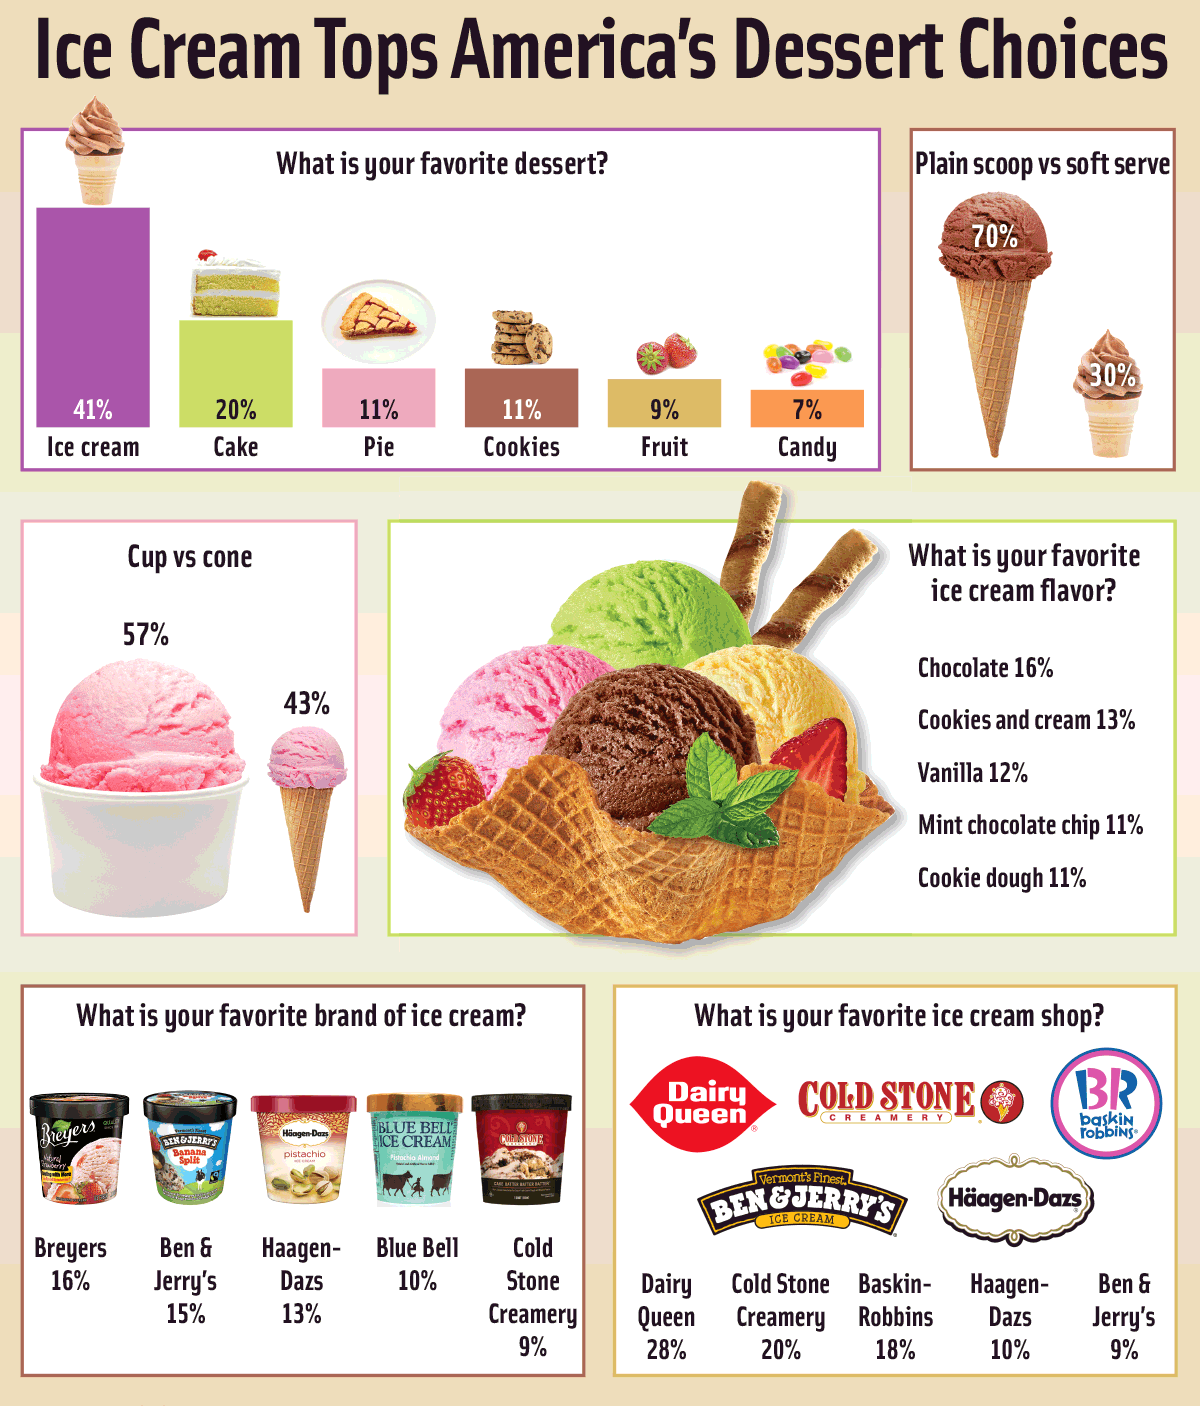 Ice Cream Tops America’s Dessert Choices. Source: Yahoo Food in partnership with Vision Critical.